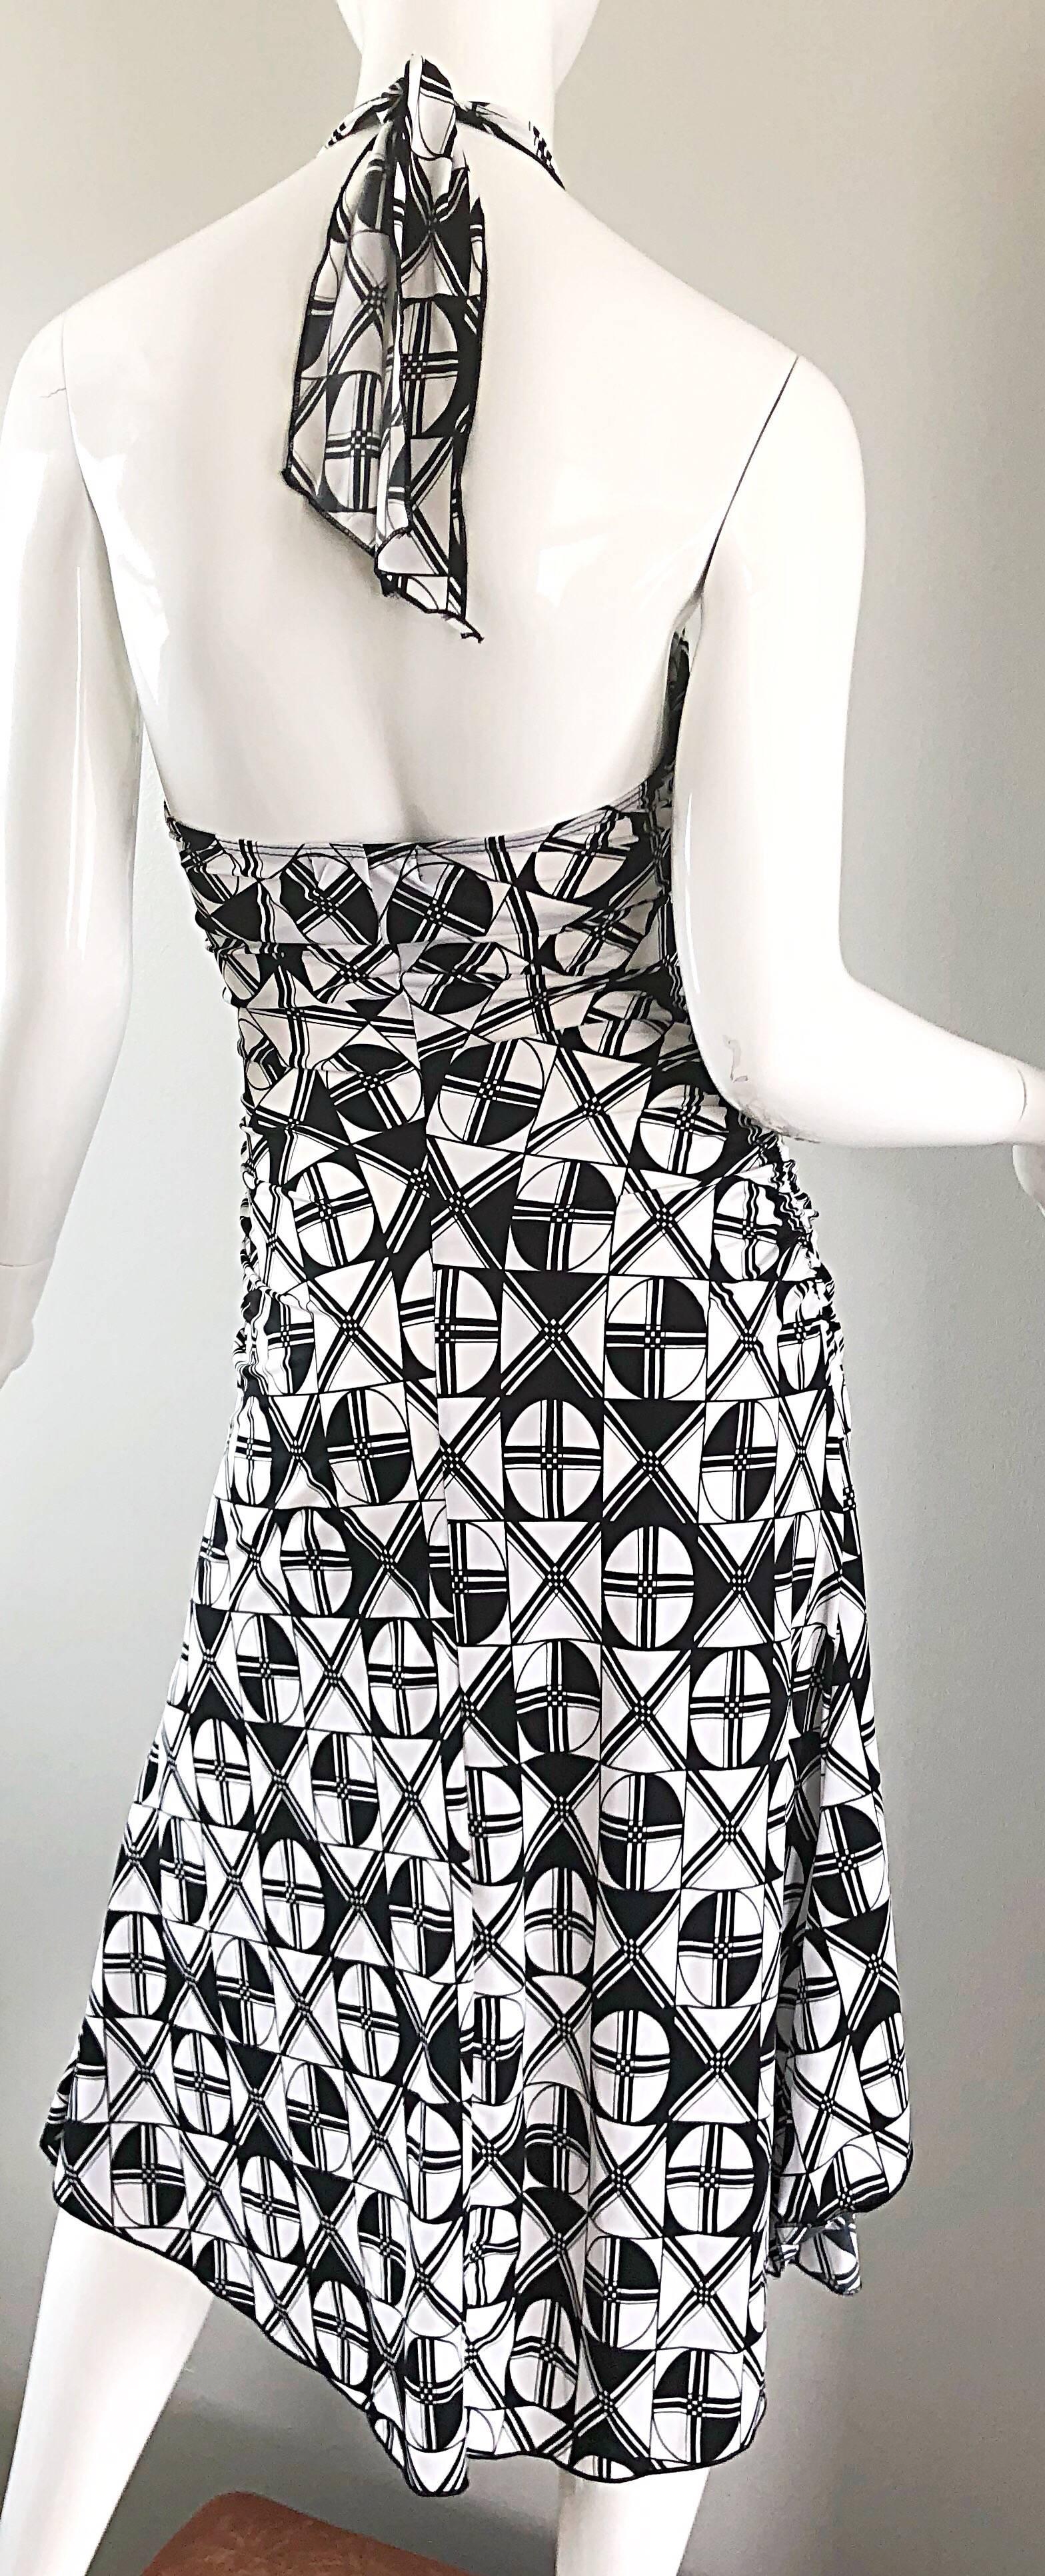 1990s Gianni Versace Versus Black and White Abstract Vintage 90s Halter Dress For Sale 7